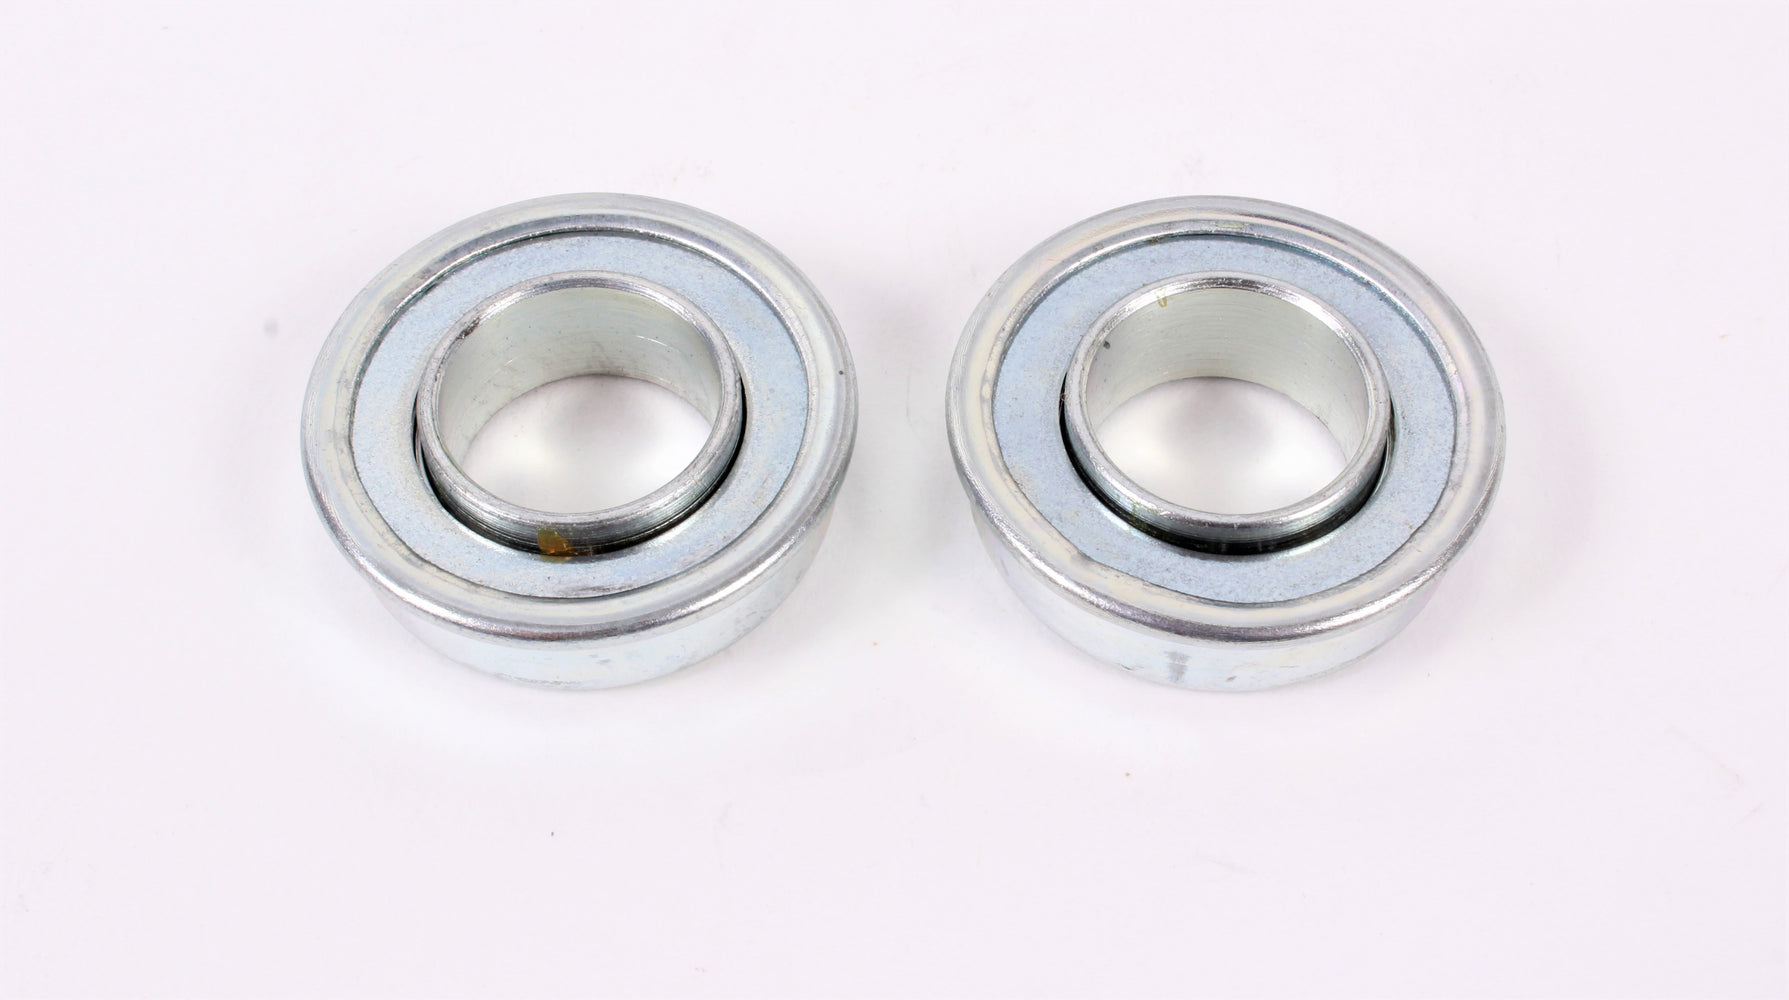 2 Pack Genuine Snapper 7011807YP Flange Wheel Bearing Replaces 7011807 1-1807